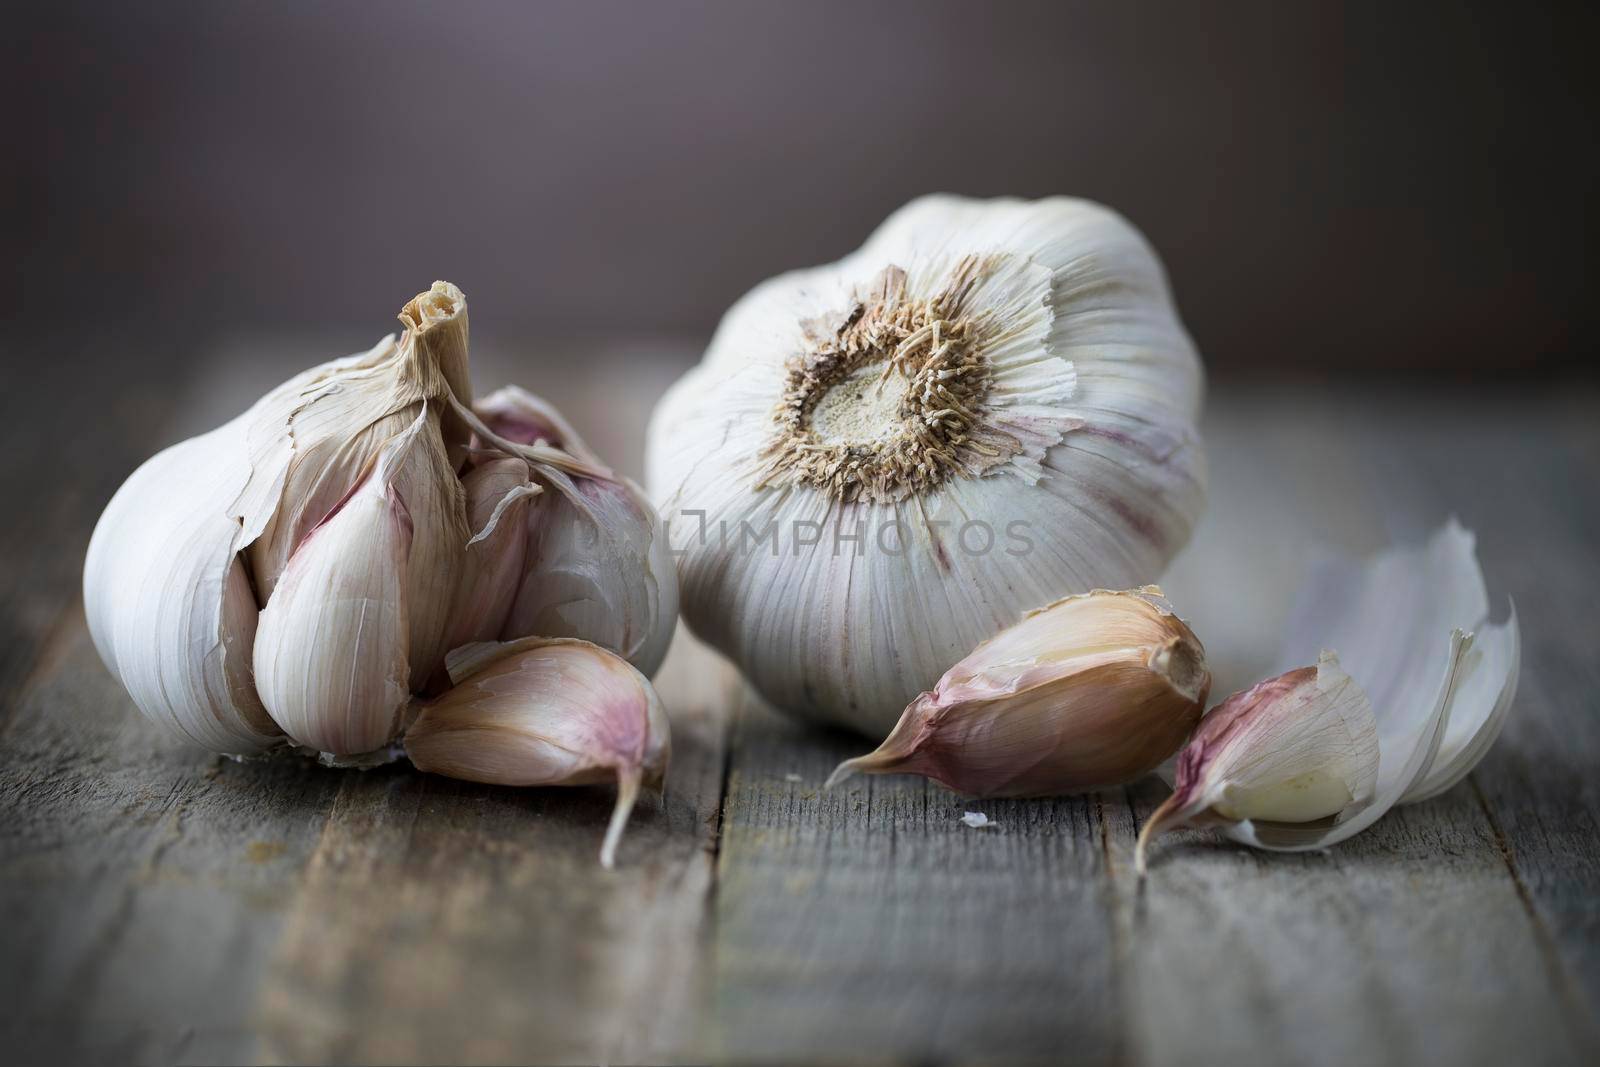 Head of Garlic with Cloves by charlotteLake